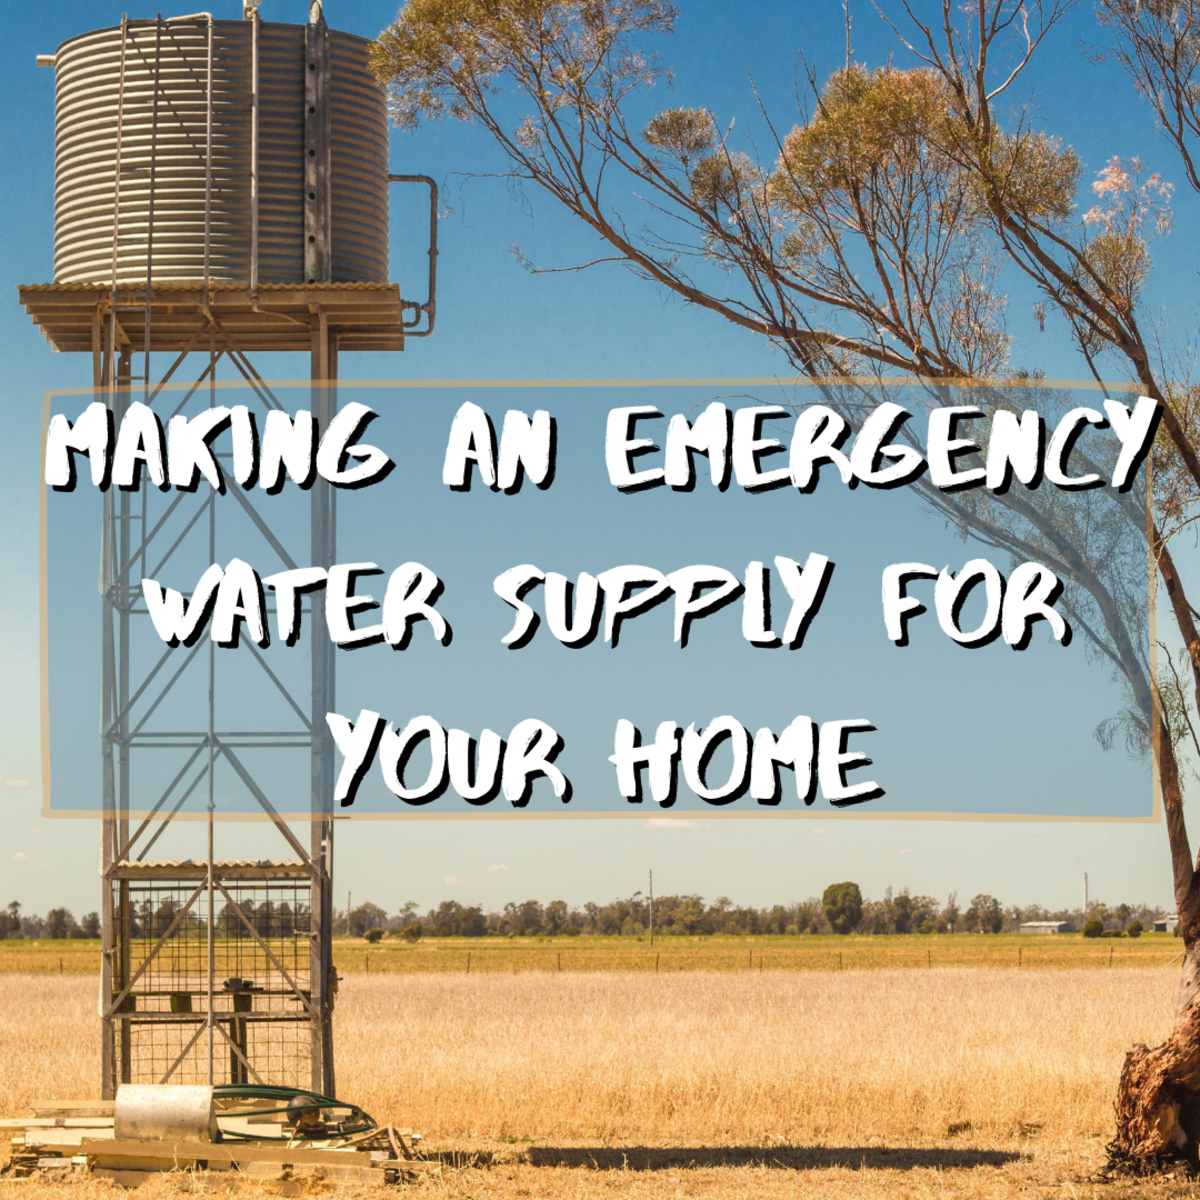 How to Make an Emergency Water Supply for Your Home